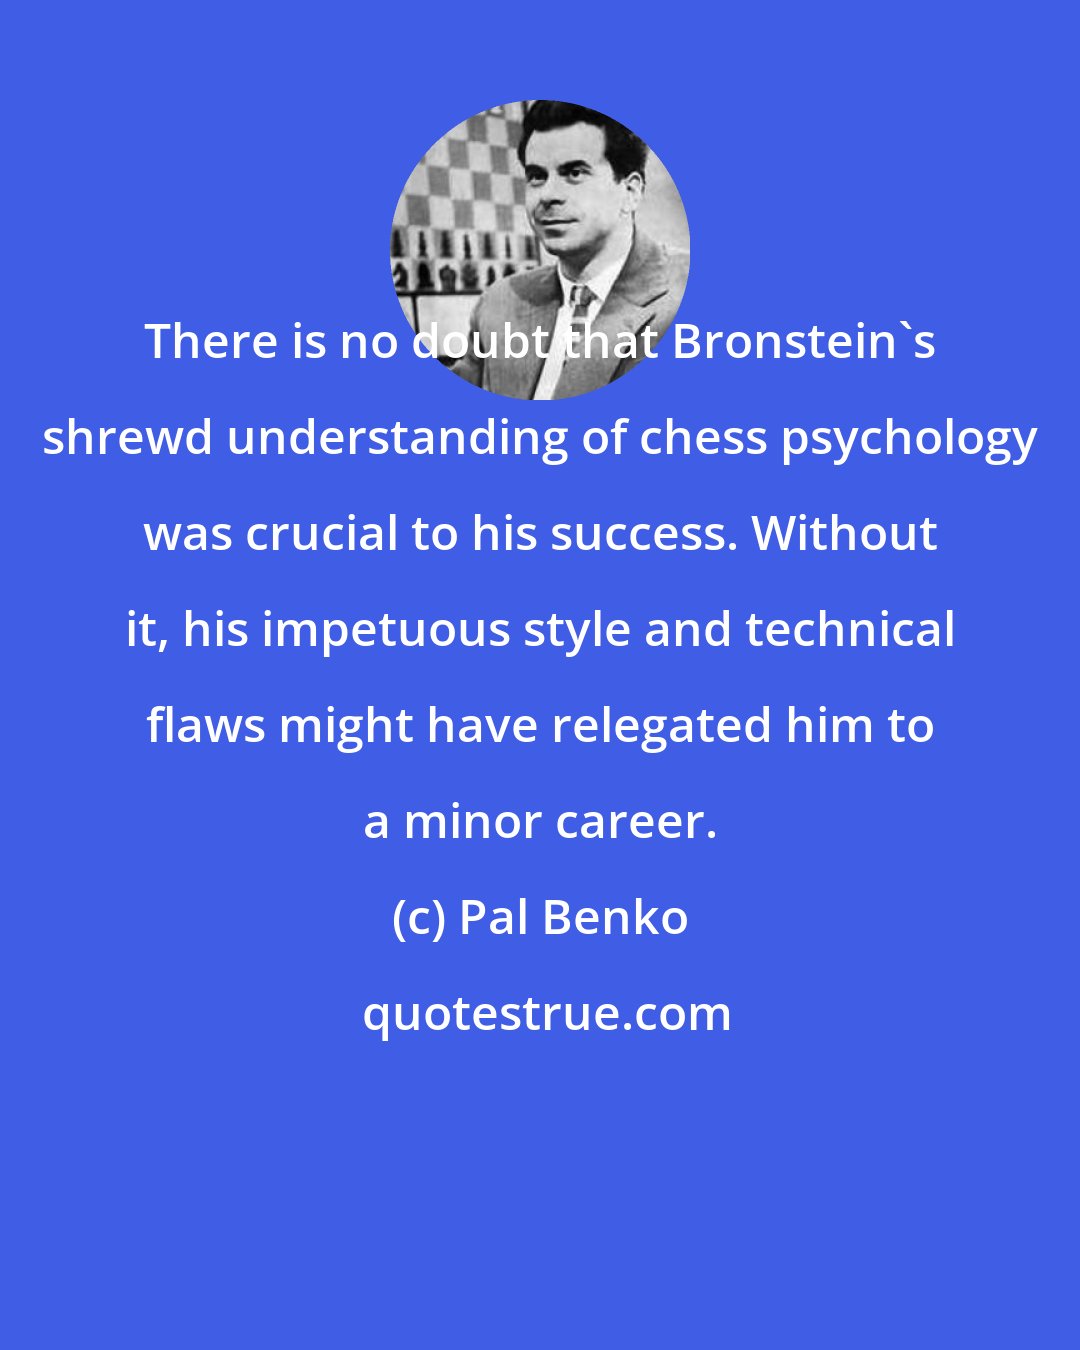 Pal Benko: There is no doubt that Bronstein's shrewd understanding of chess psychology was crucial to his success. Without it, his impetuous style and technical flaws might have relegated him to a minor career.